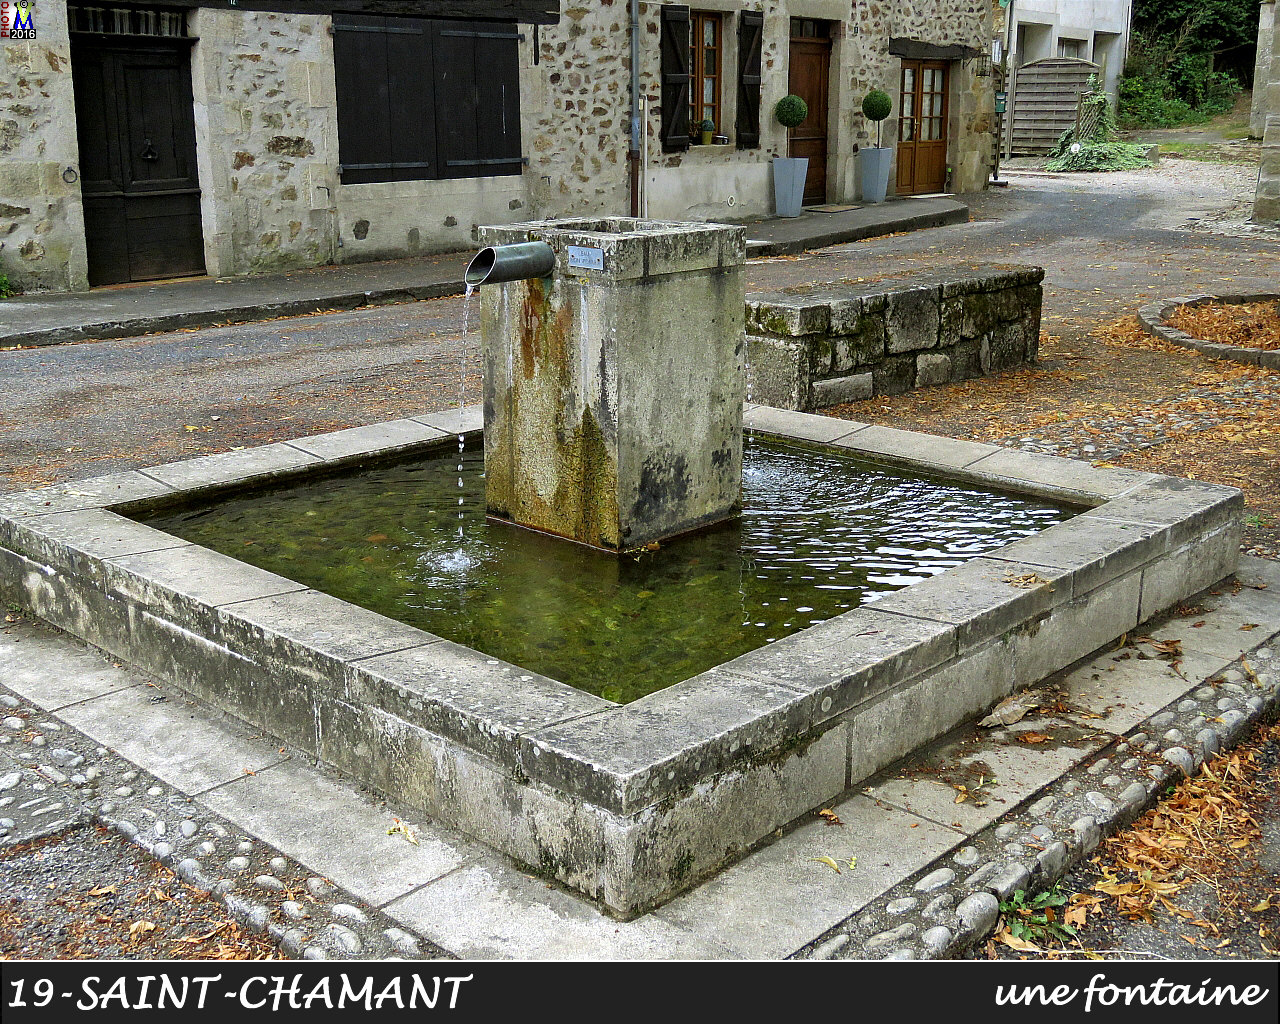 19StCHAMANT_fontaine_100.jpg